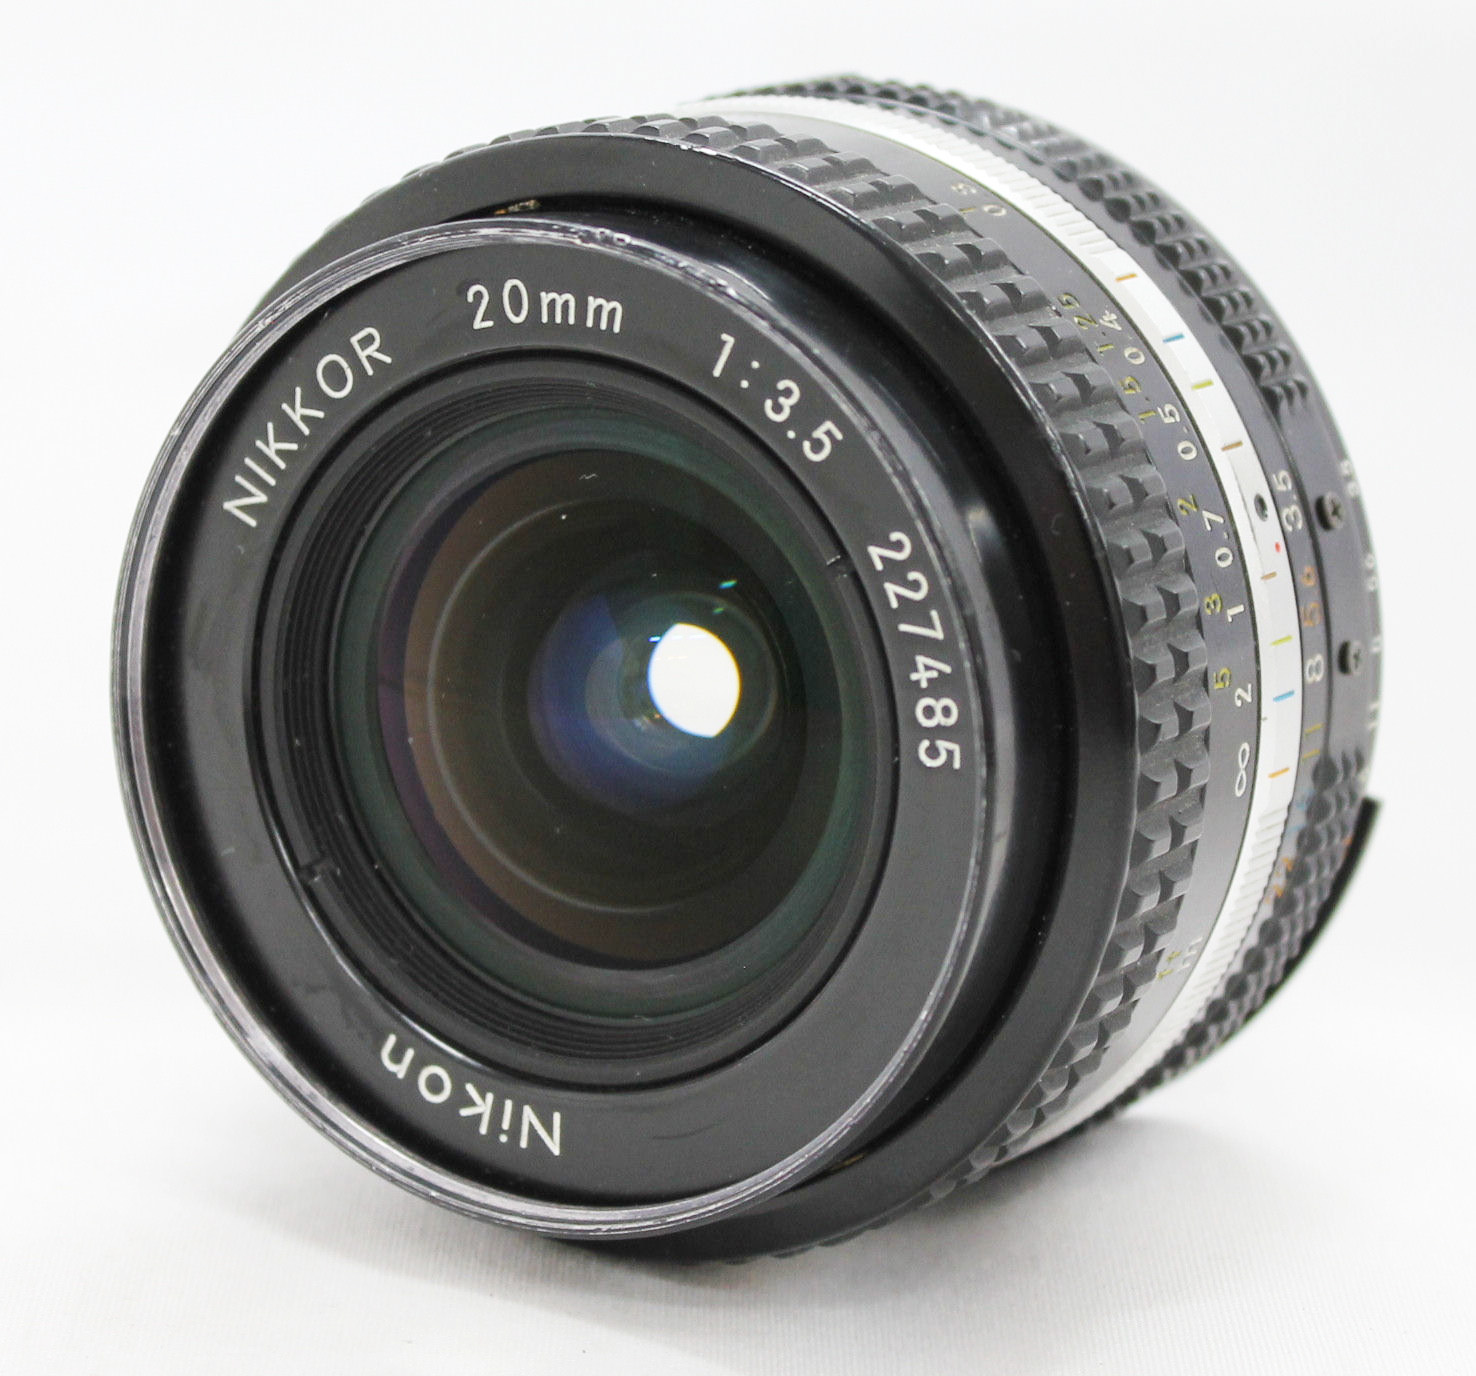 [Excellent++++] Nikon Ai-s Ais Nikkor 20mm F/3.5 Wide Angle MF Lens from Japan